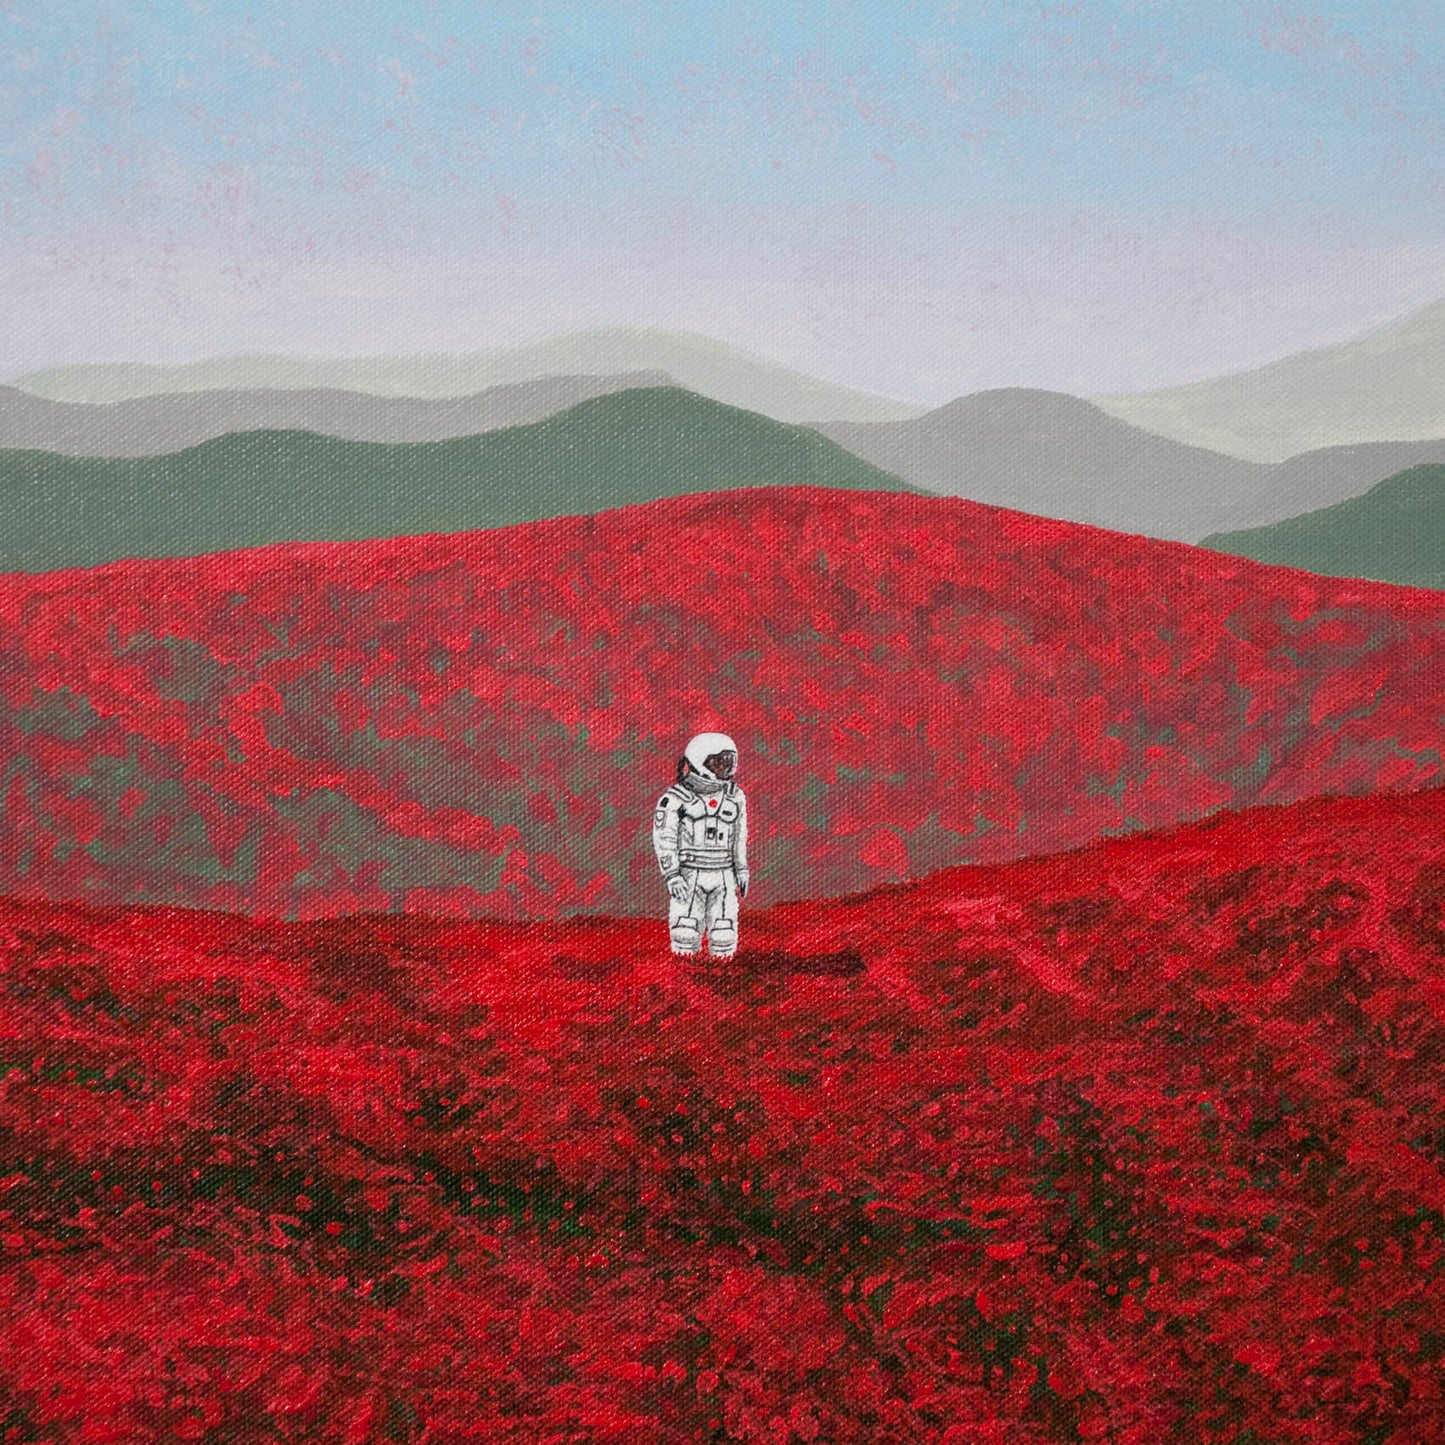 Original semiabstract landscape painting of red fields with an astronaut in white space suit with greenish grey hills in the beyond.